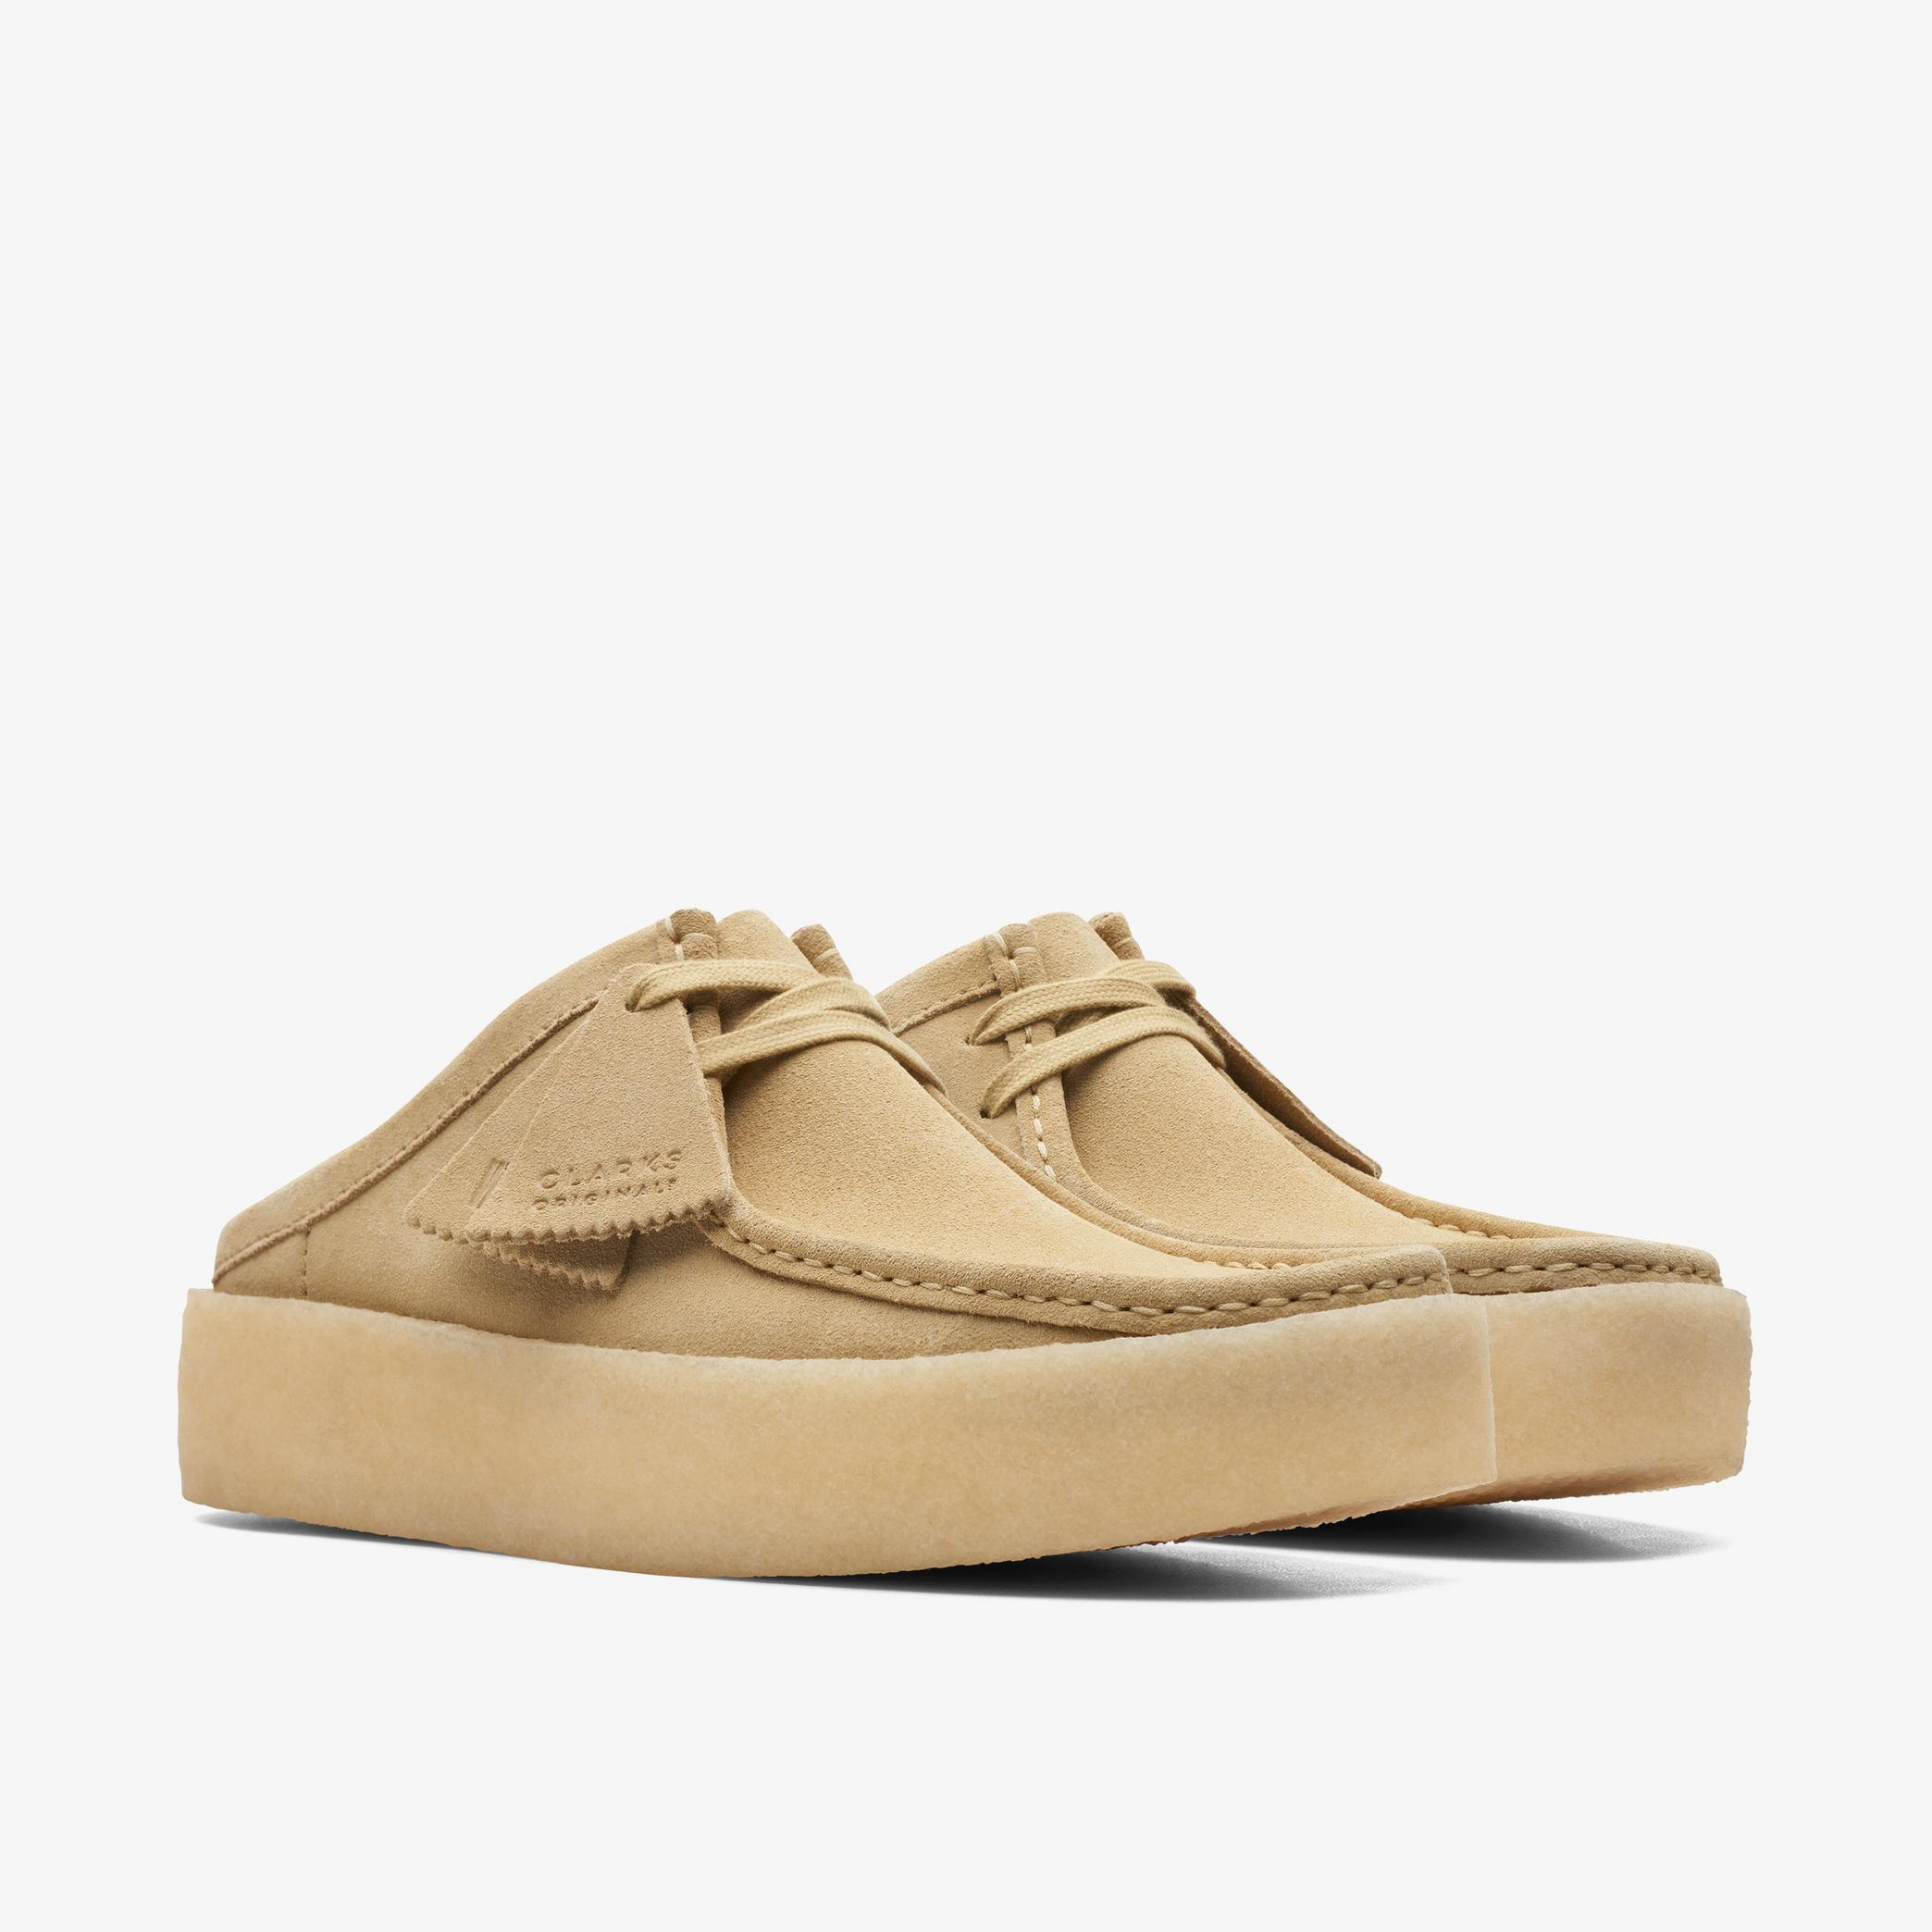 Wallabee Cup Lo Maple Suede Shoes, view 4 of 6